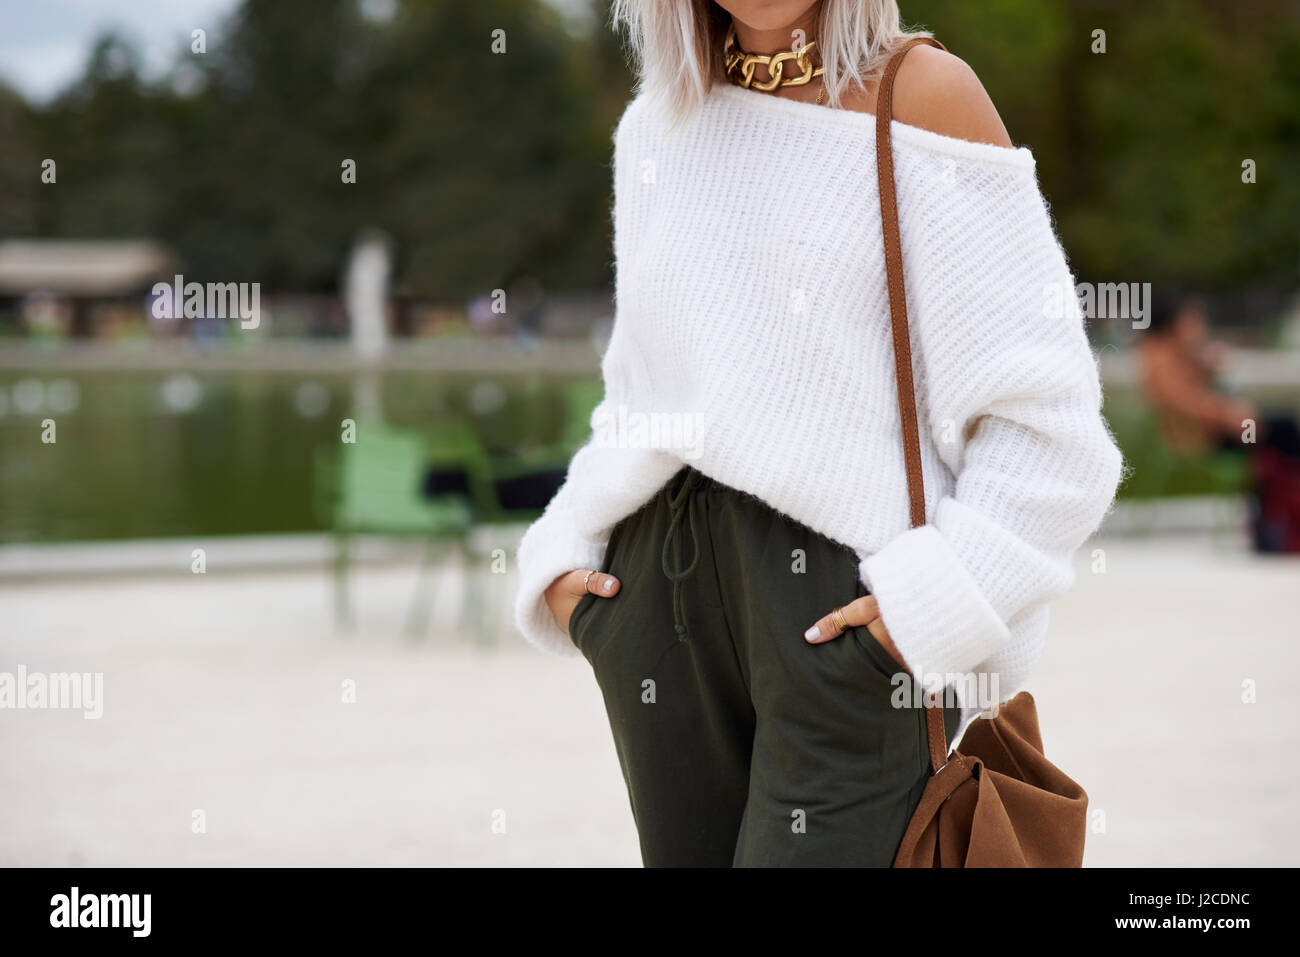 Woman in park wearing white sweater and sweatpants, crop Stock Photo